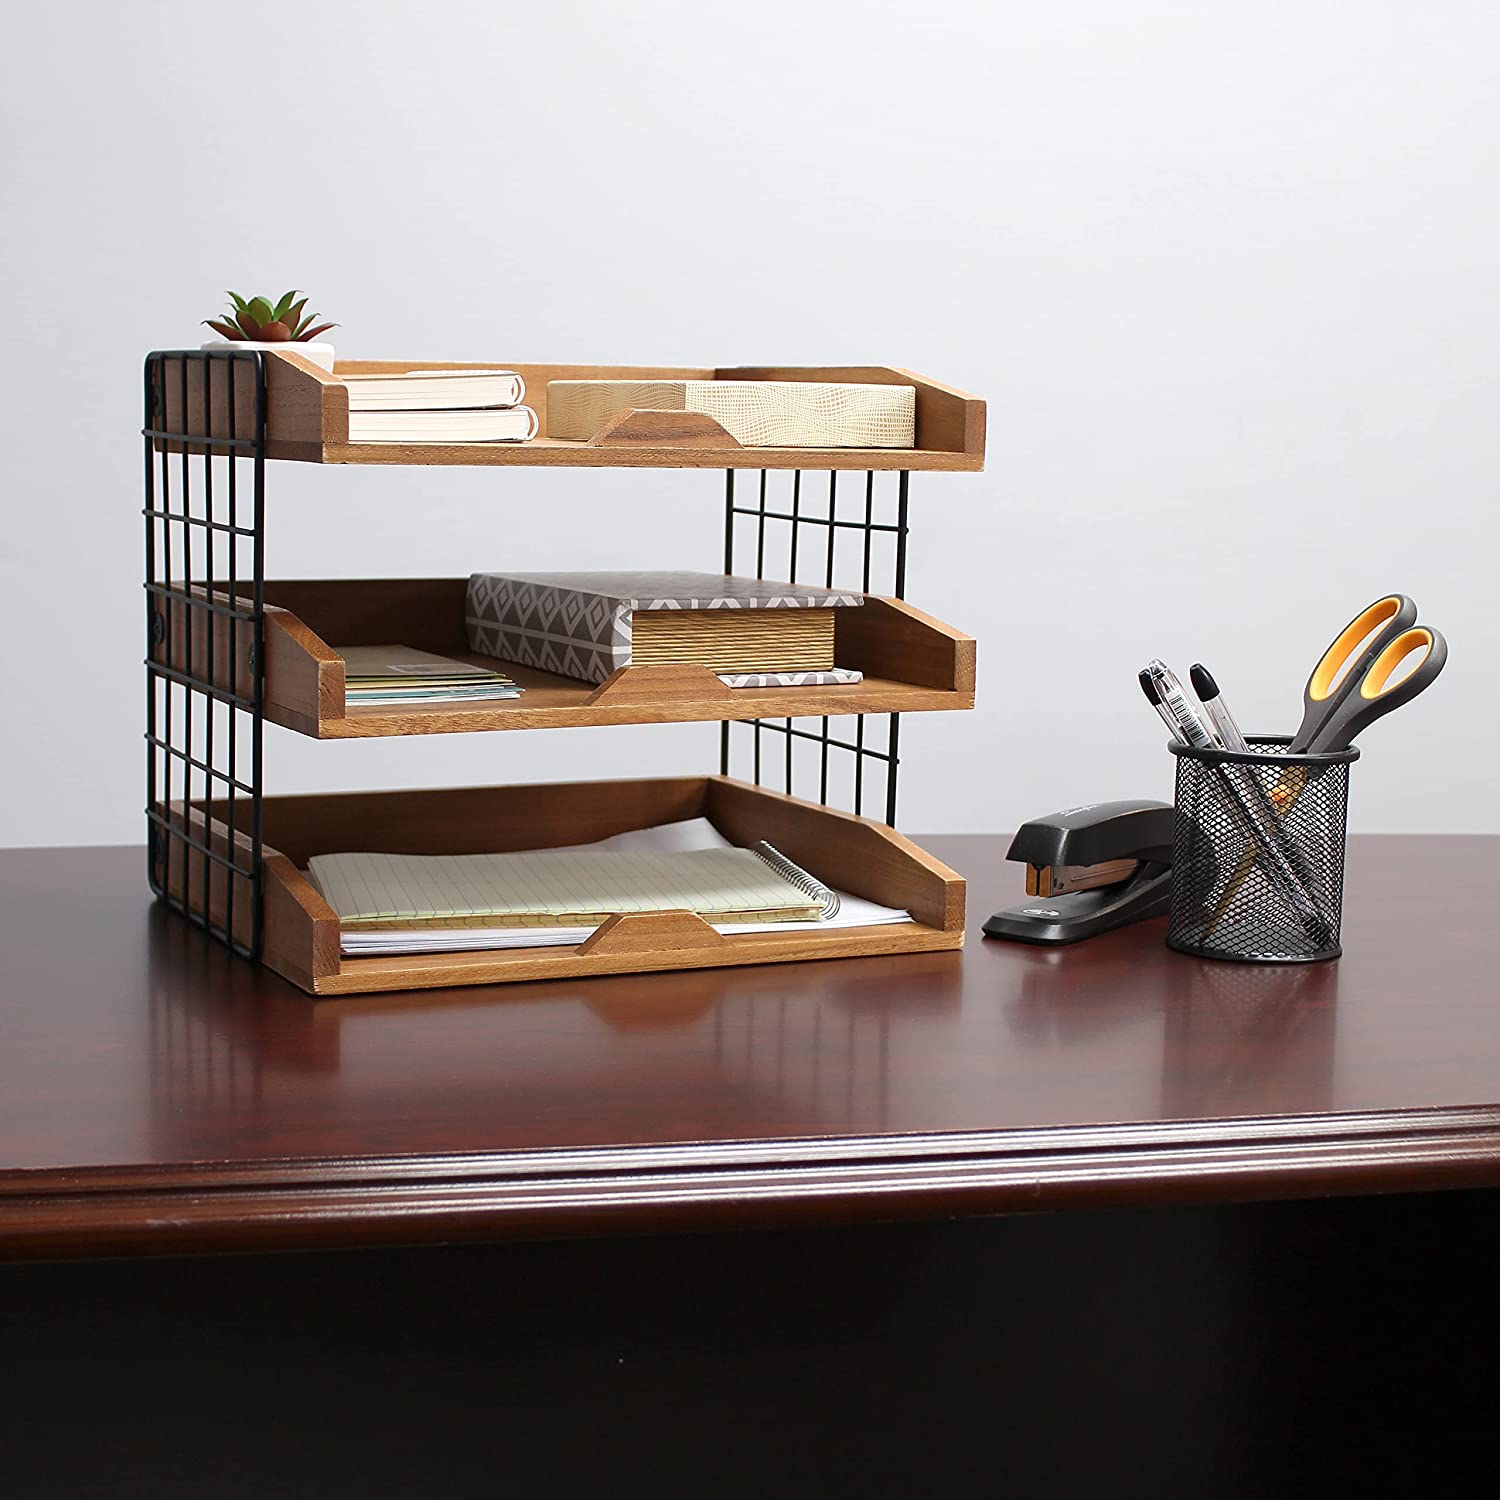 Elegant Designs HG1022-NWD Home Office Wood Desk Organizer Mail Letter Tray with 3 Shelves, Natural Wood